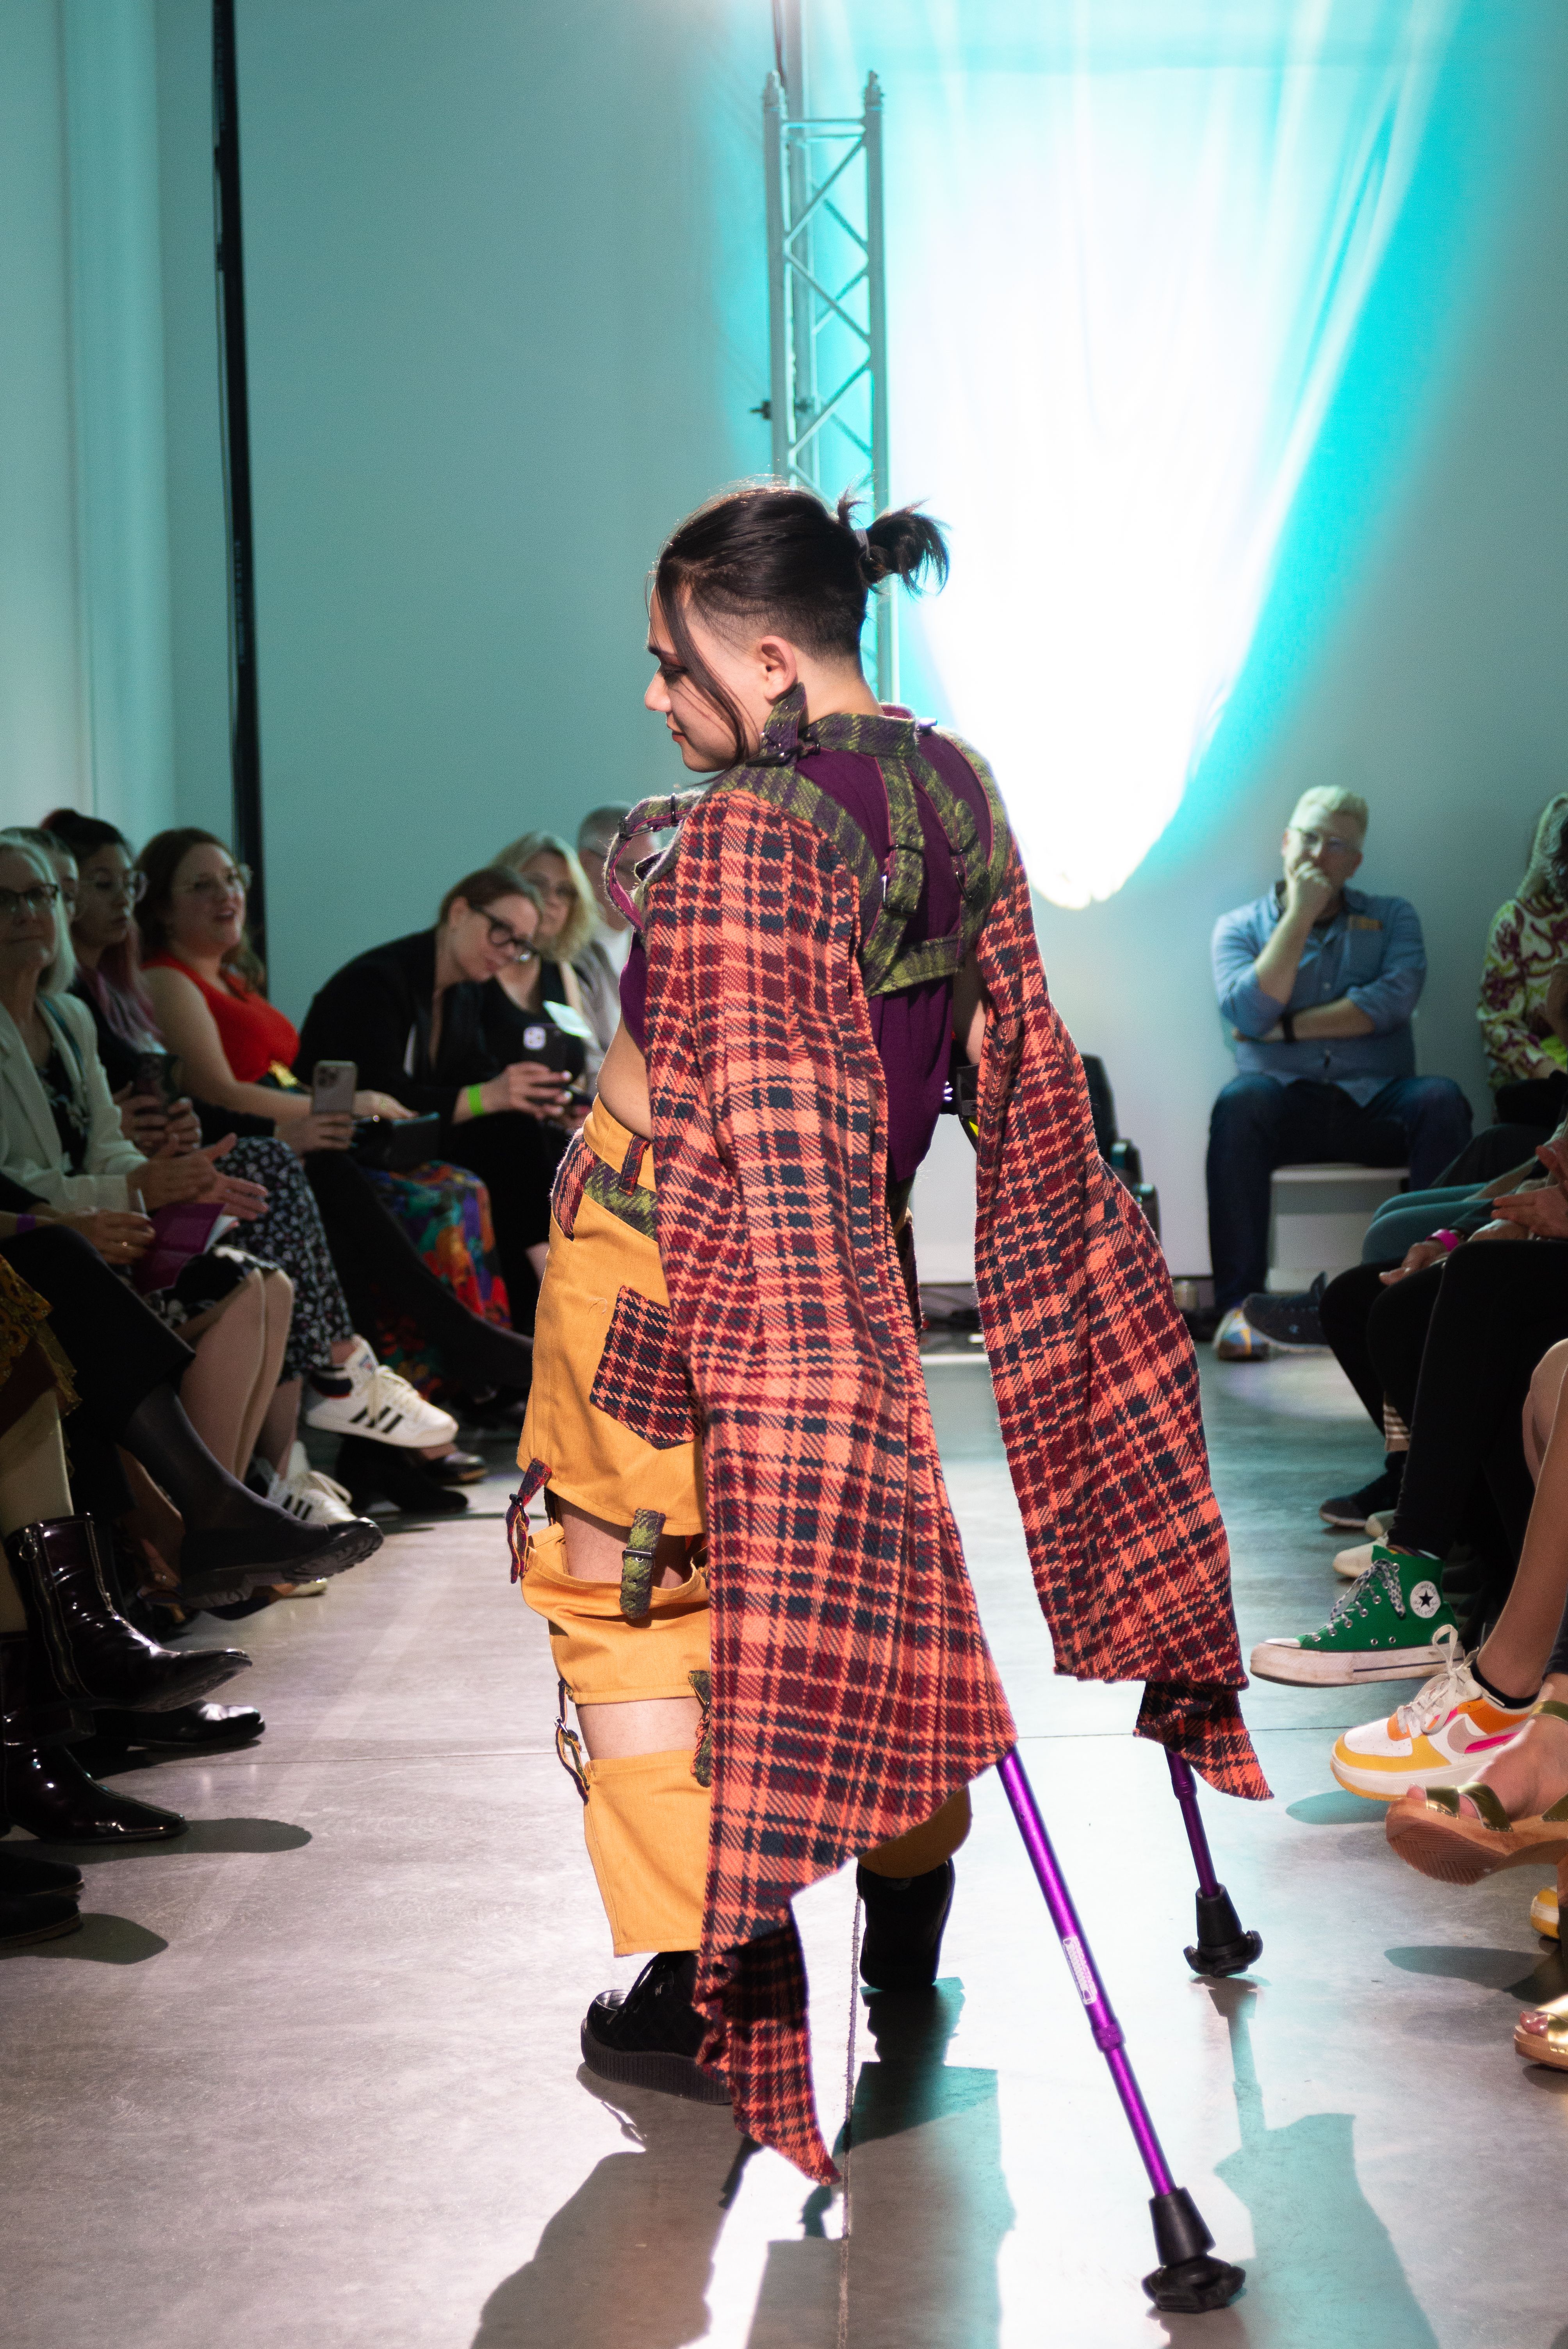 A model on the runway posing with their canes wearing a plaid cape and yellow pants with plaid details.